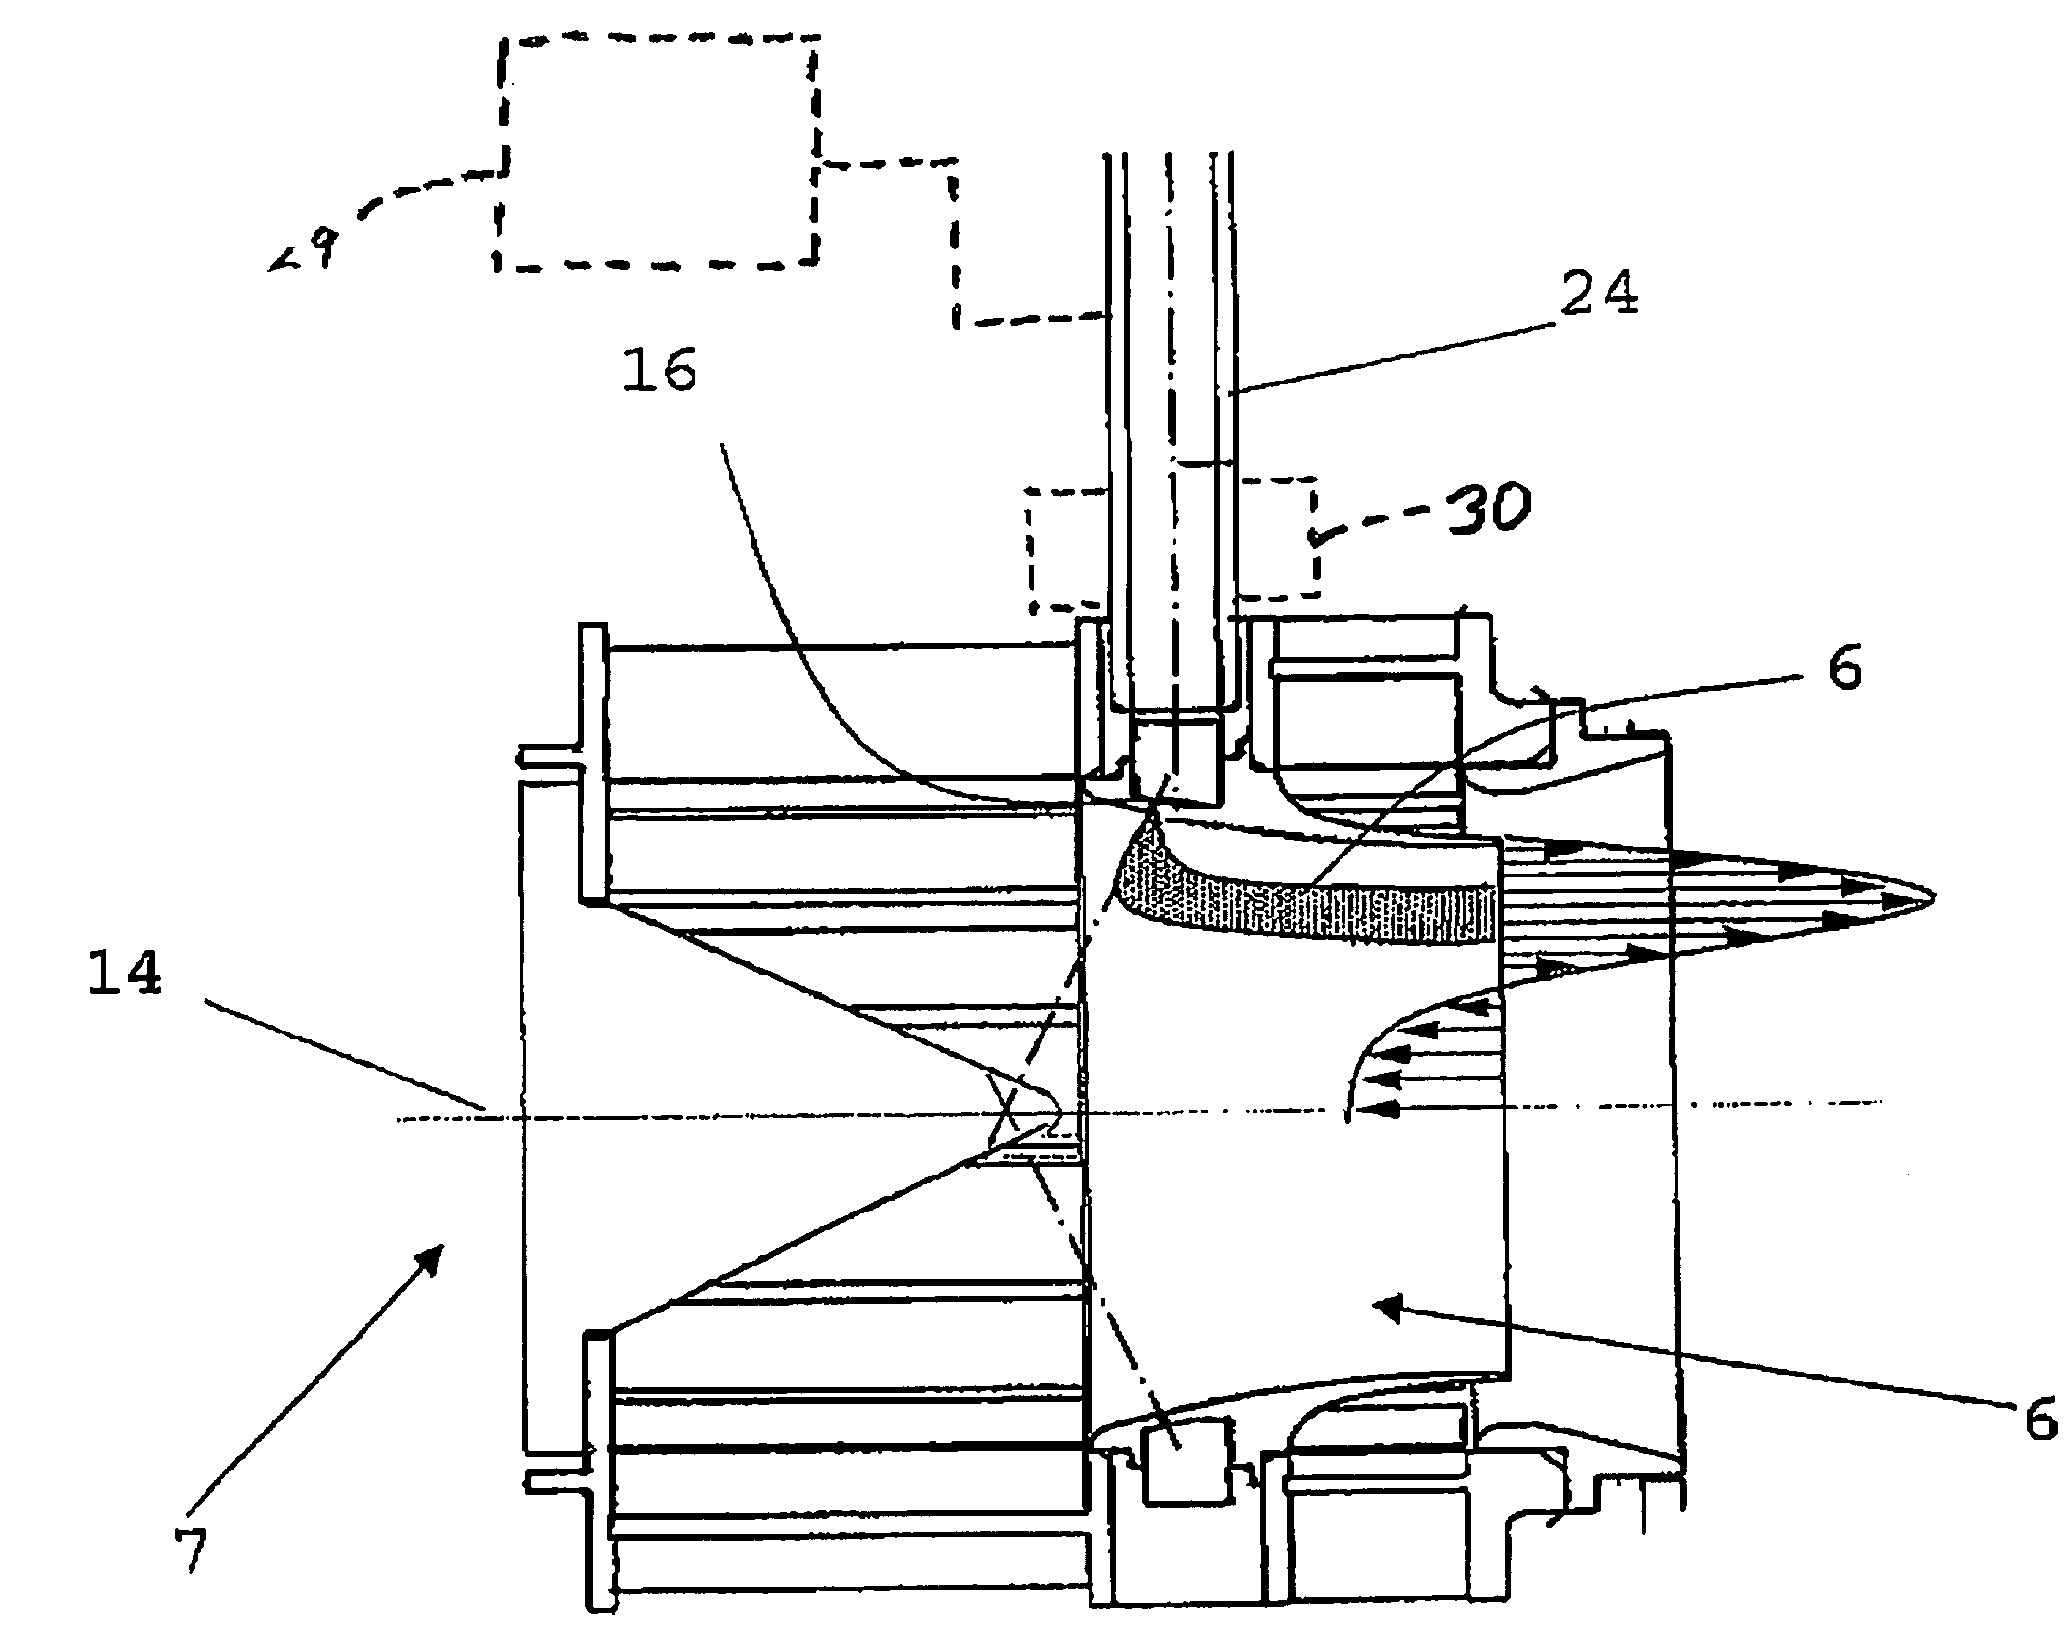 Gas turbine combustion chamber with defined fuel input for the improvement of the homogeneity of the fuel-air mixture